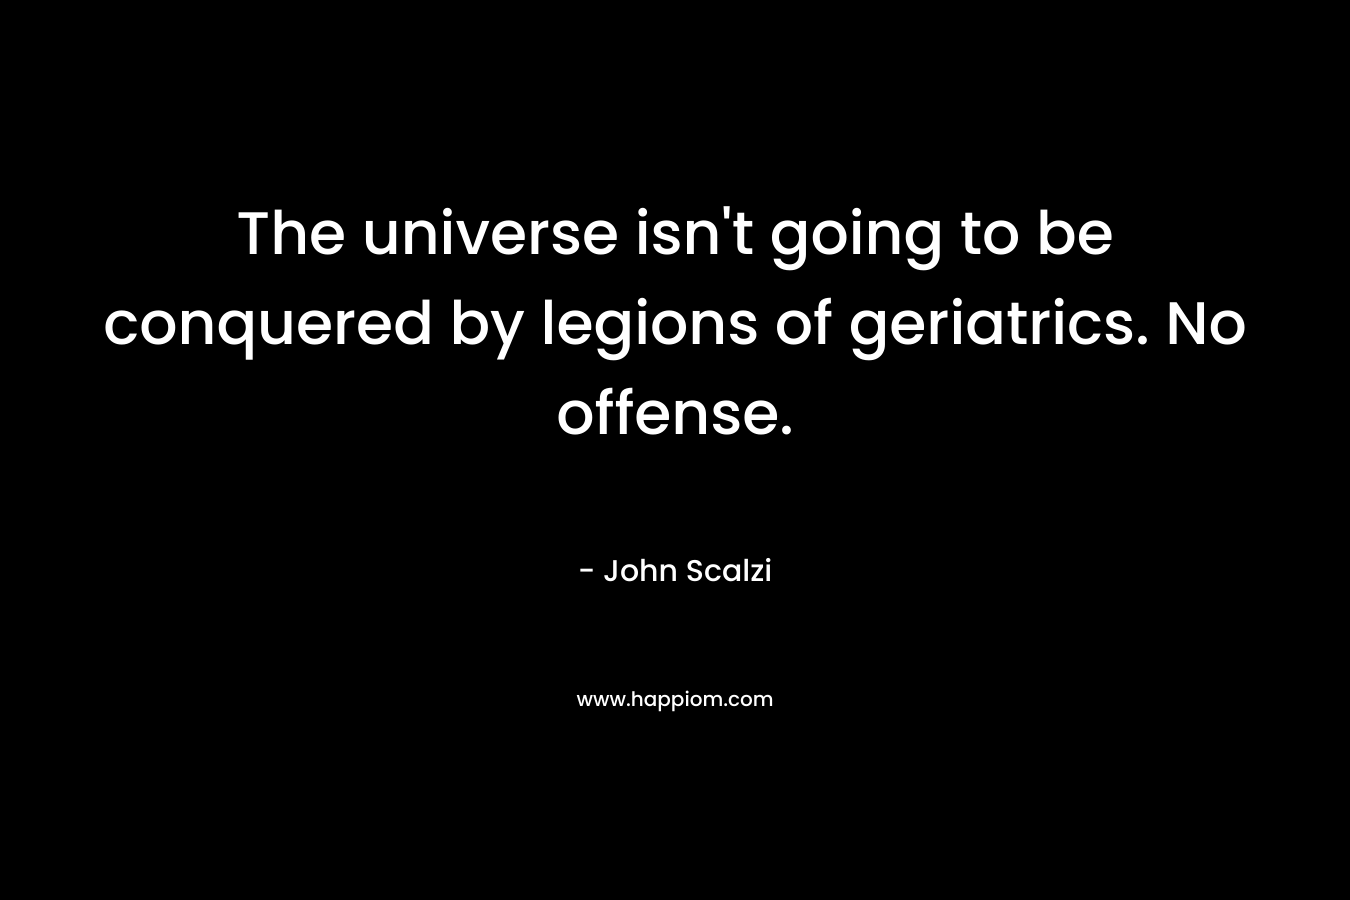 The universe isn’t going to be conquered by legions of geriatrics. No offense. – John Scalzi